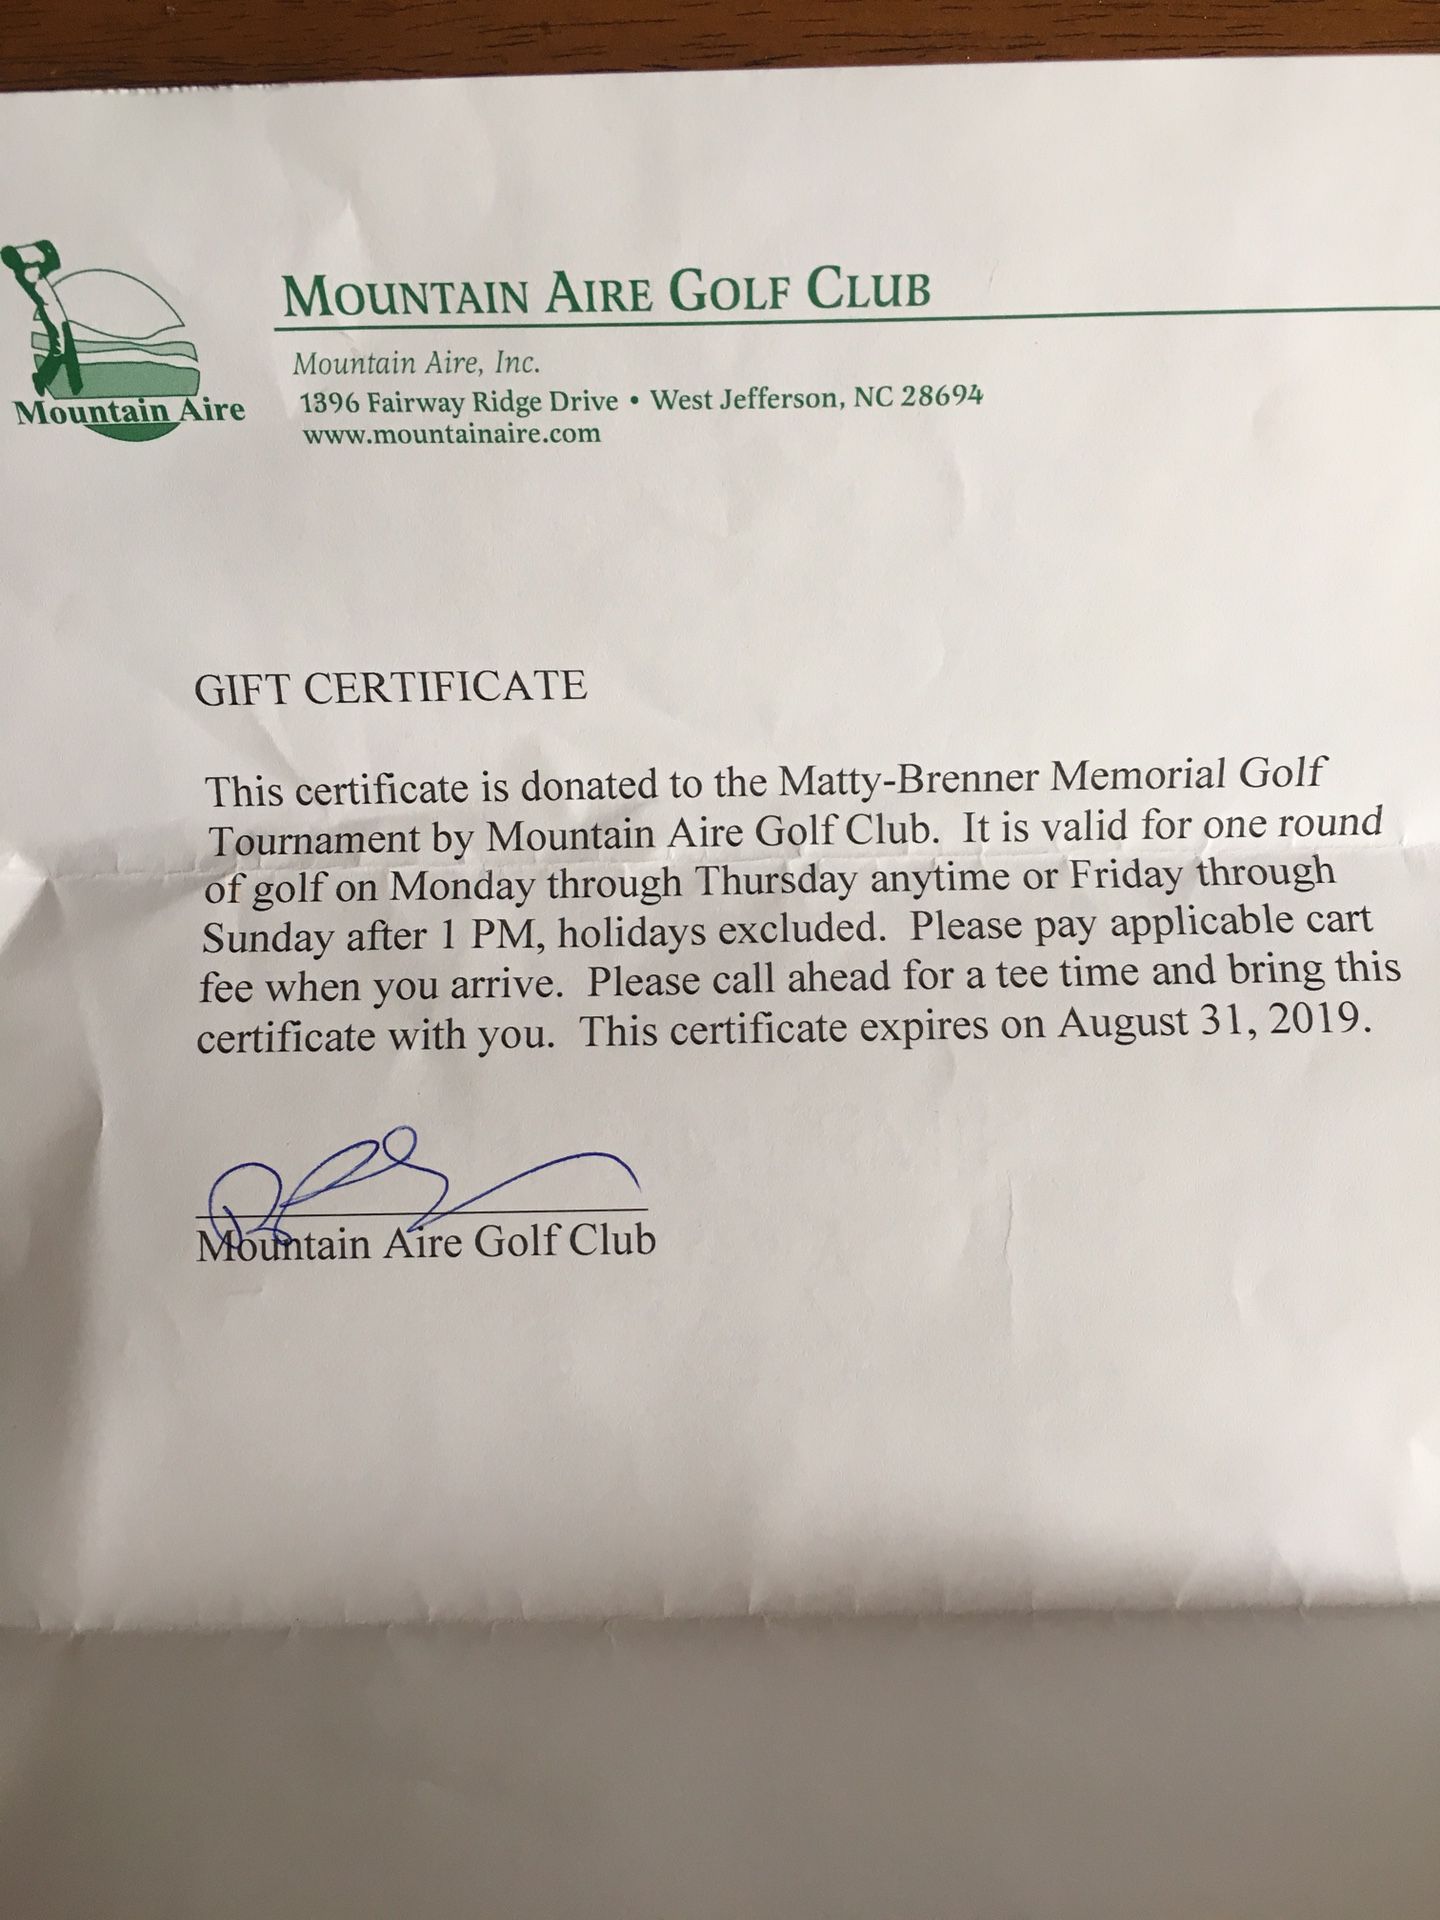 Free round of golf at Mountain Aire Golf Club